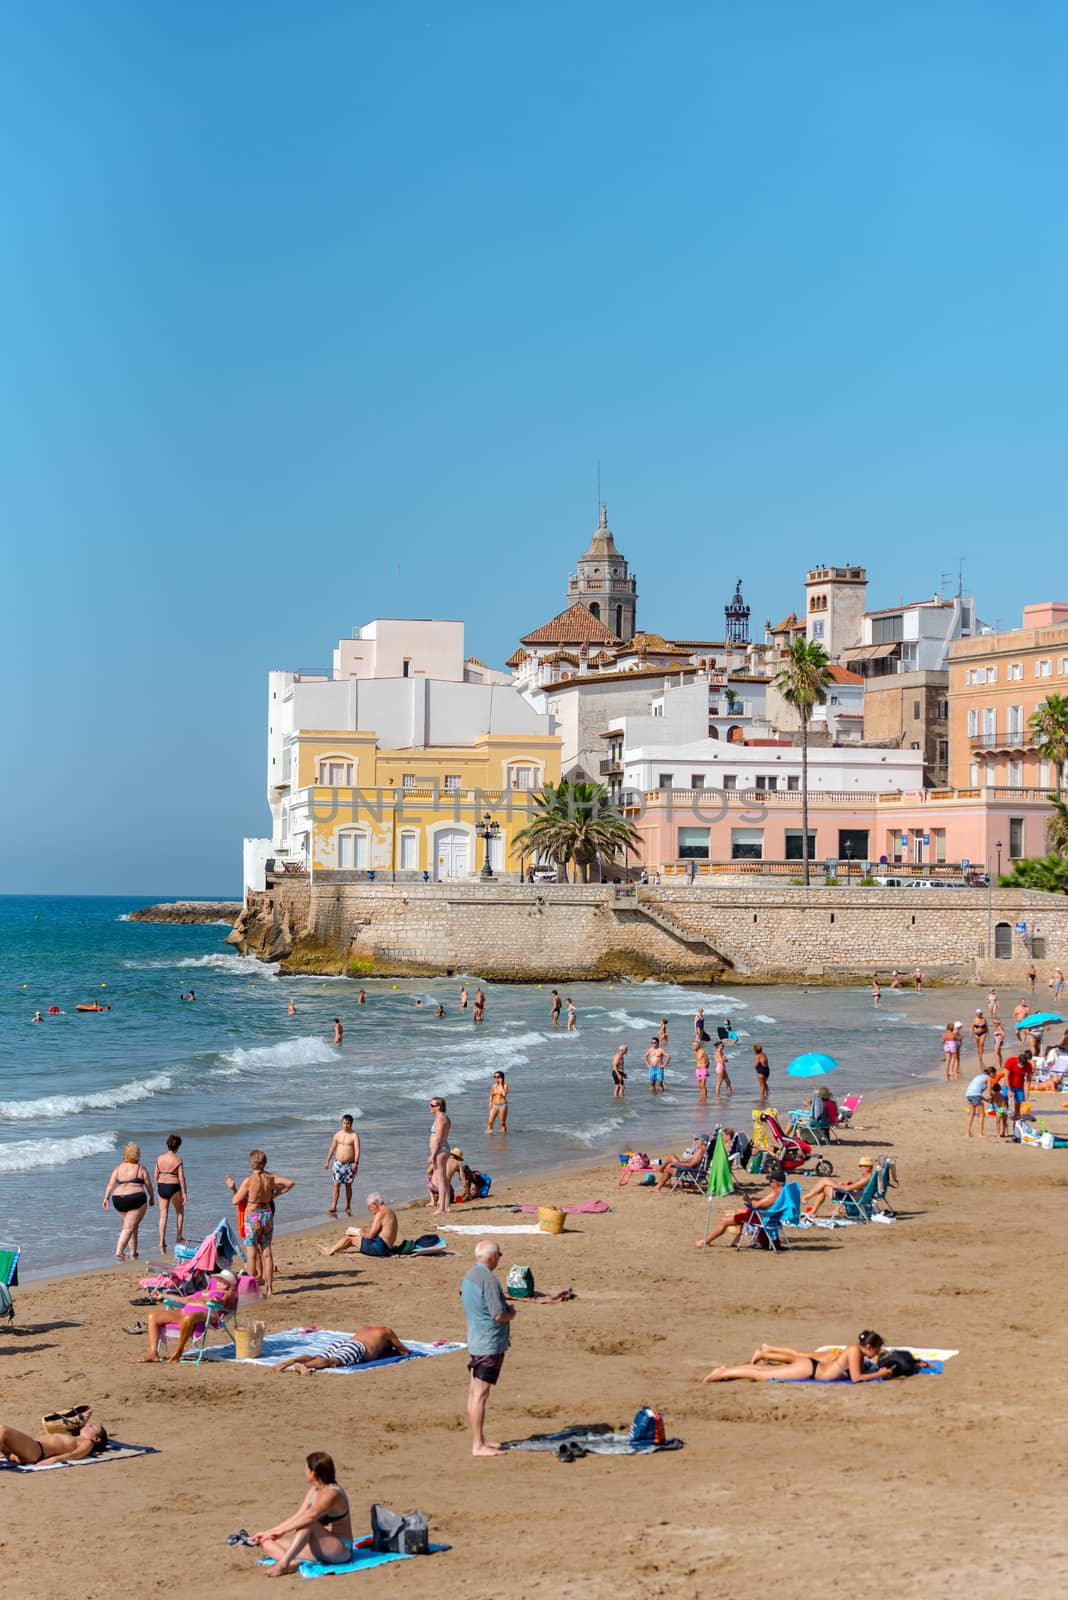 People in the beach in Sitges in summer 2020. by martinscphoto